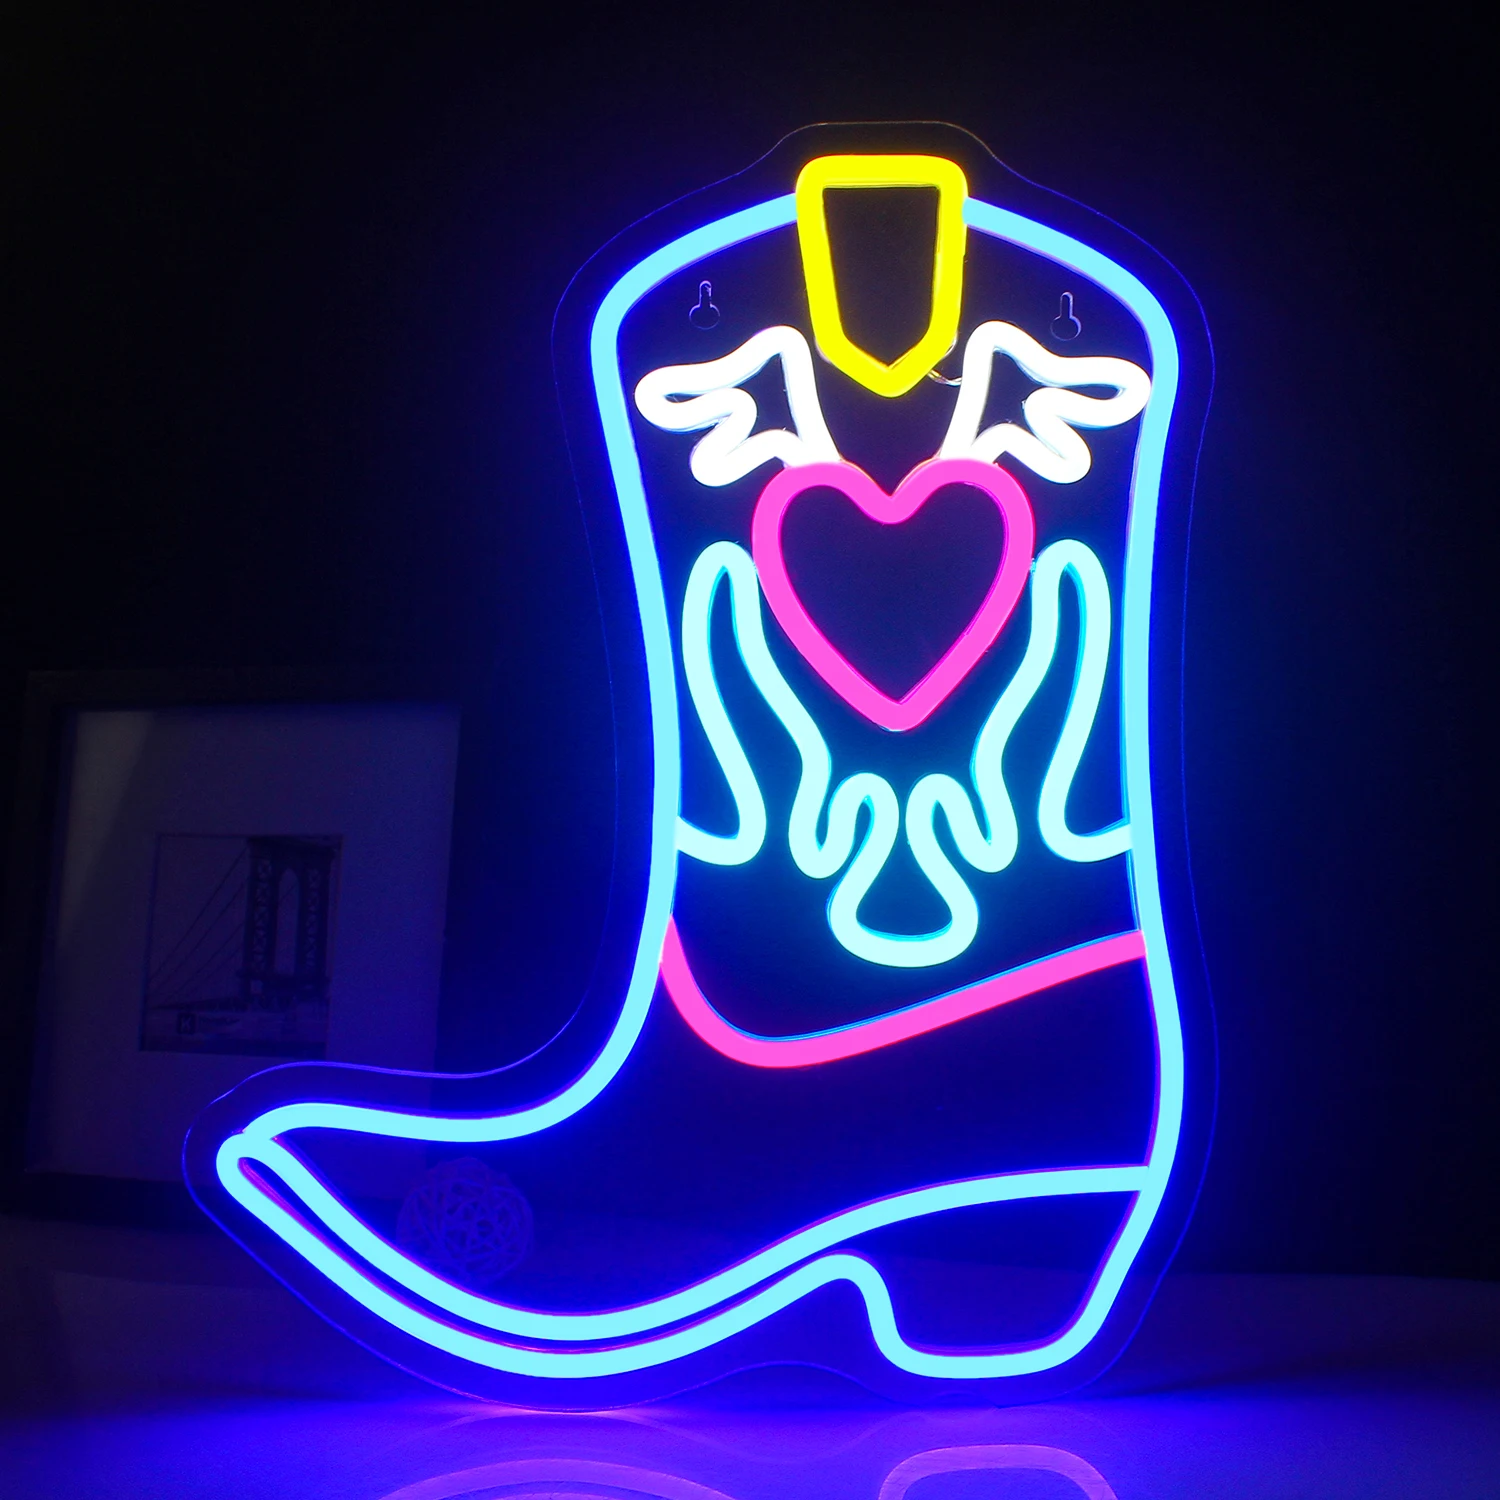 

Cowboy Boot Neon Sign Wall Decor USB Light Up Signs For Game Room Bedroom Western Cowboy Shop Bar Man Cave Birthday Party Gifts